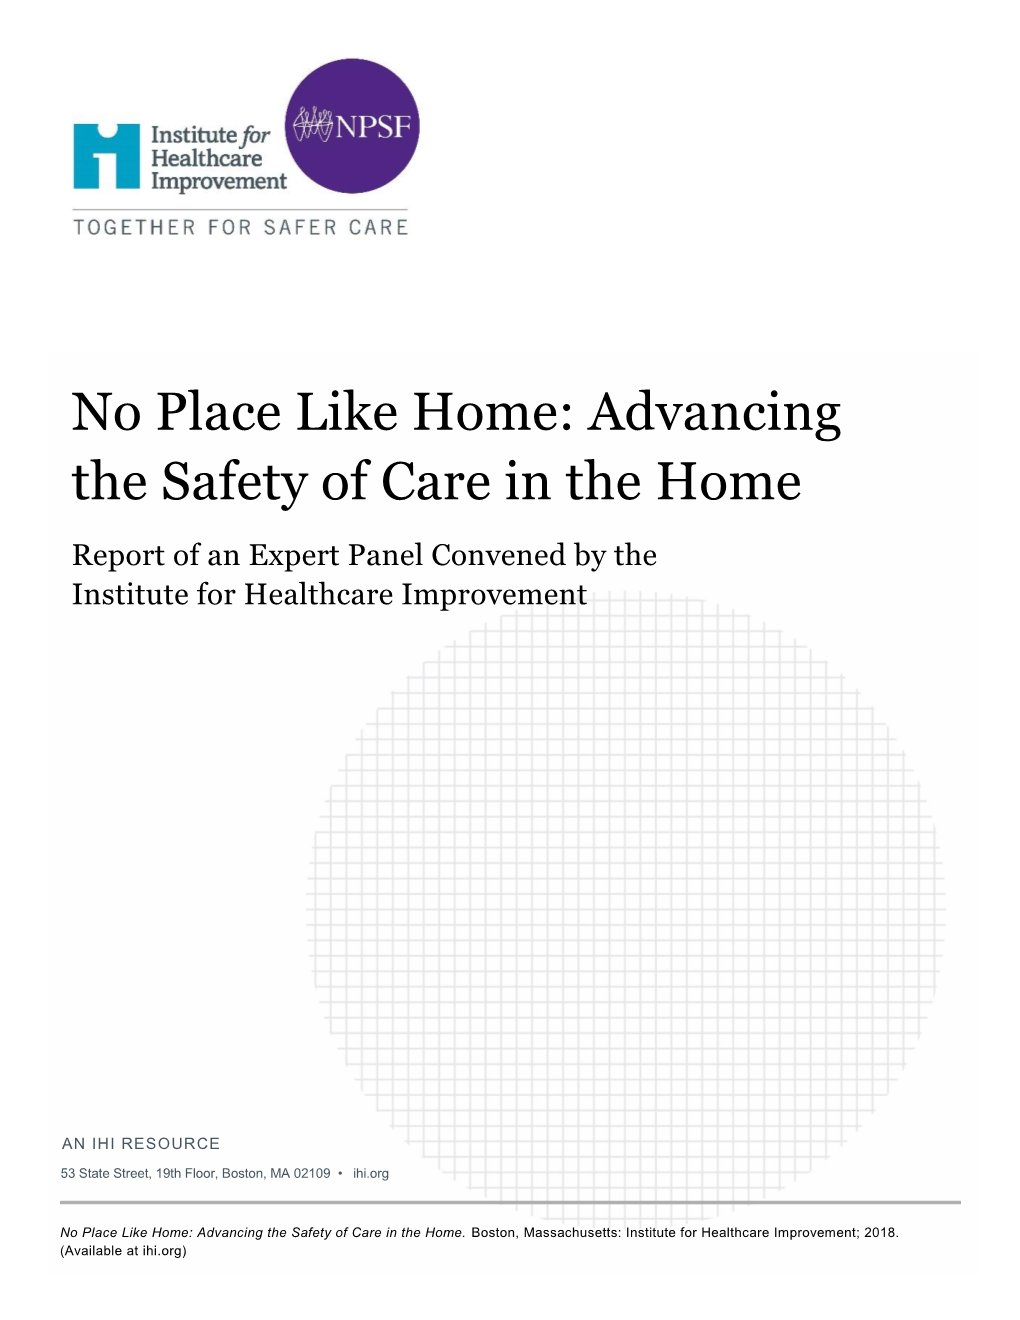 No Place Like Home: Advancing the Safety of Care in the Home